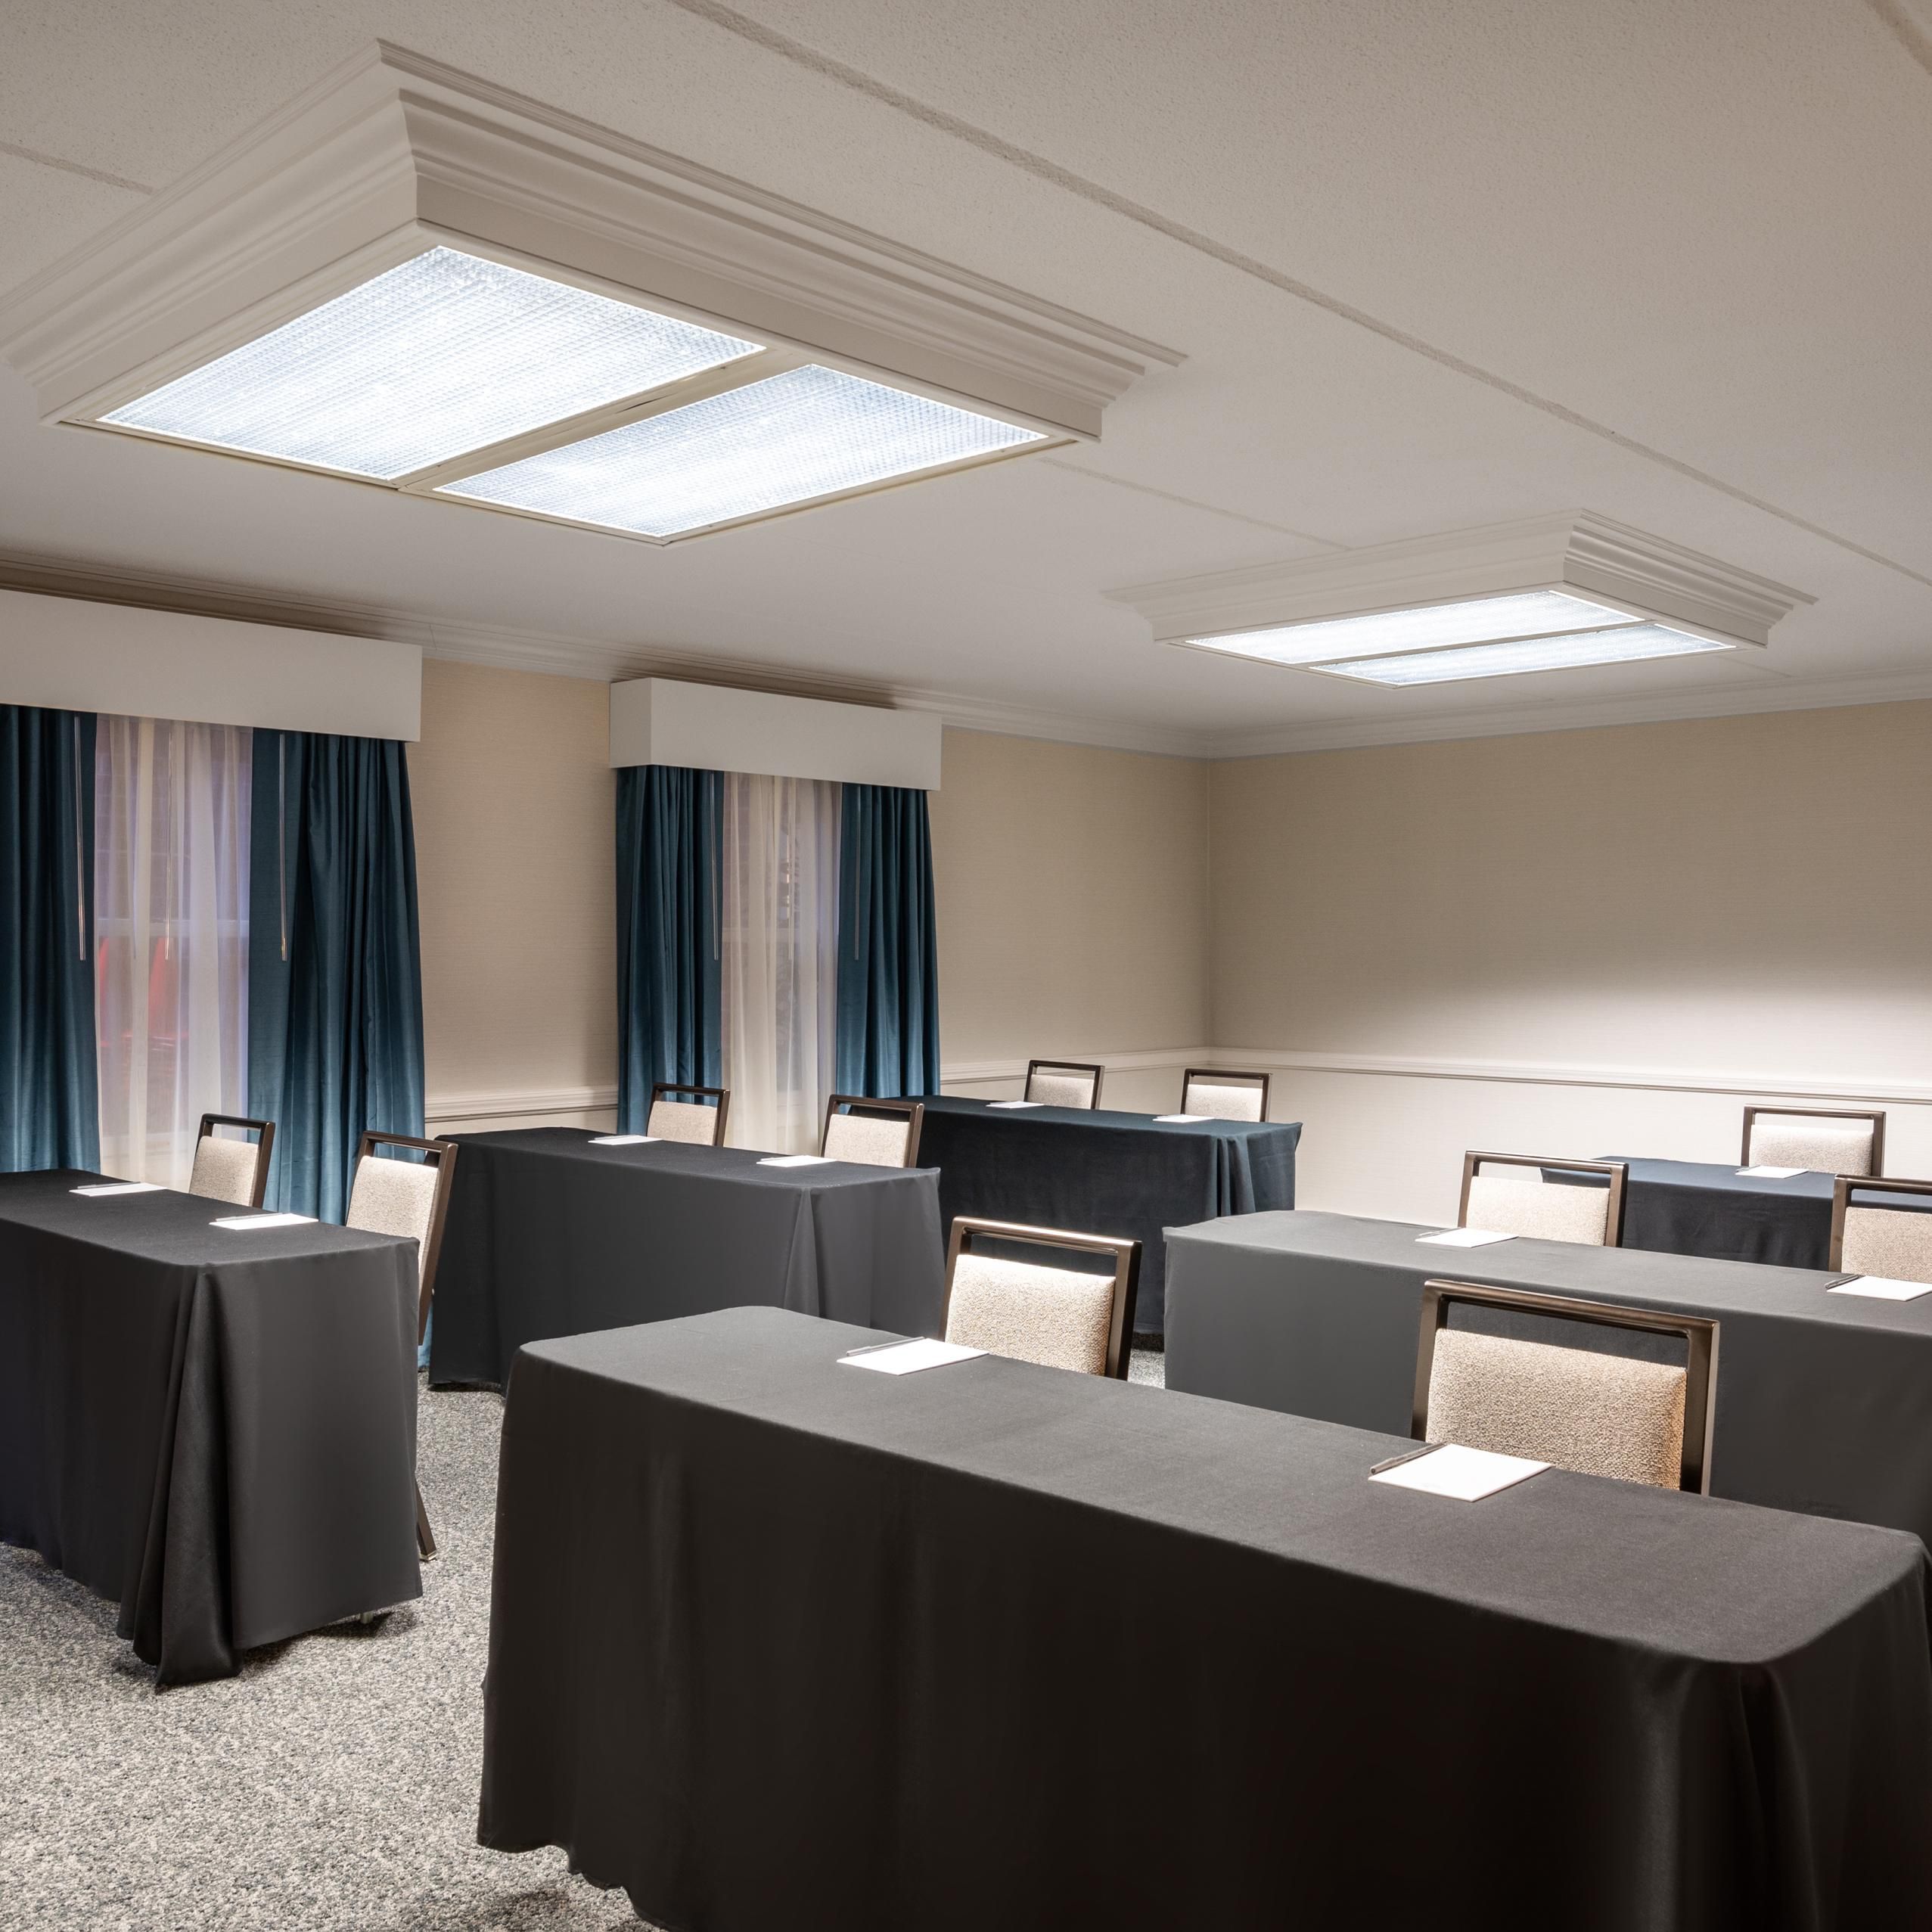 Our Executive Meeting Suites can seat up to 18 classroom style